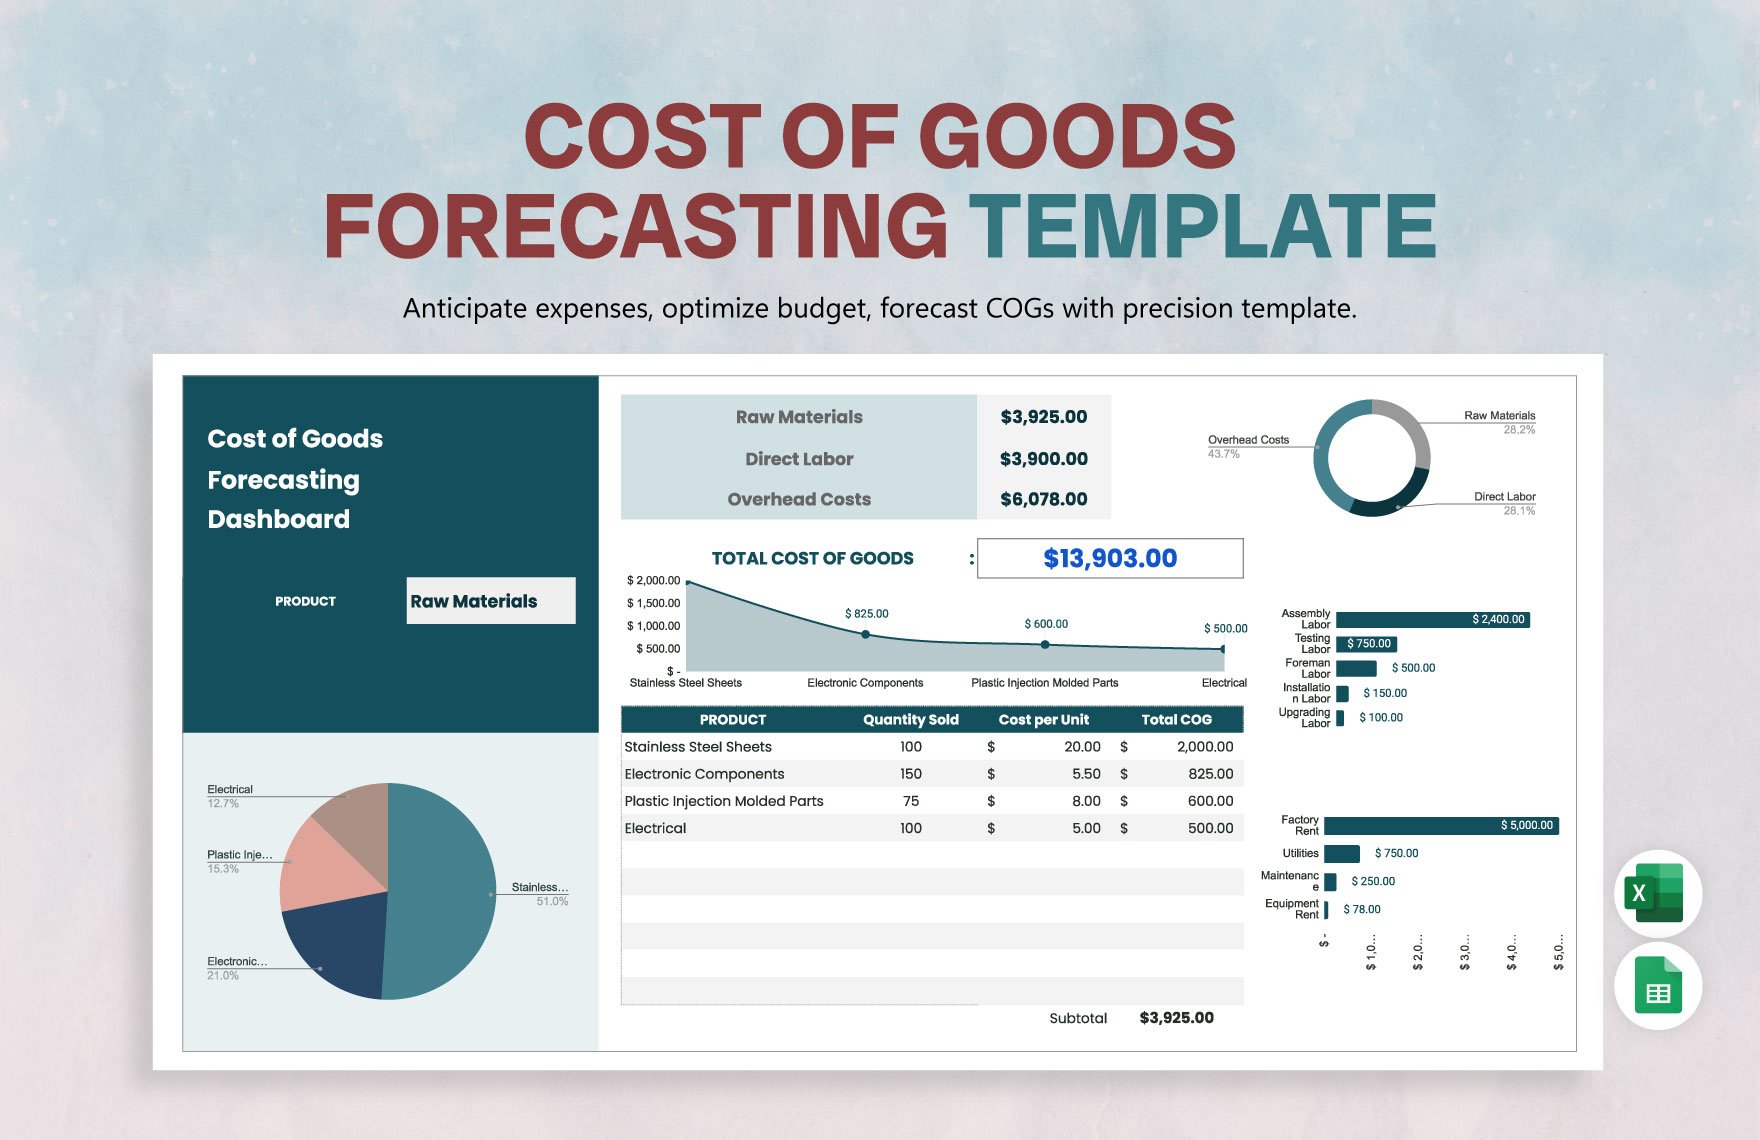 Cost of Goods (COG) Forecasting Template